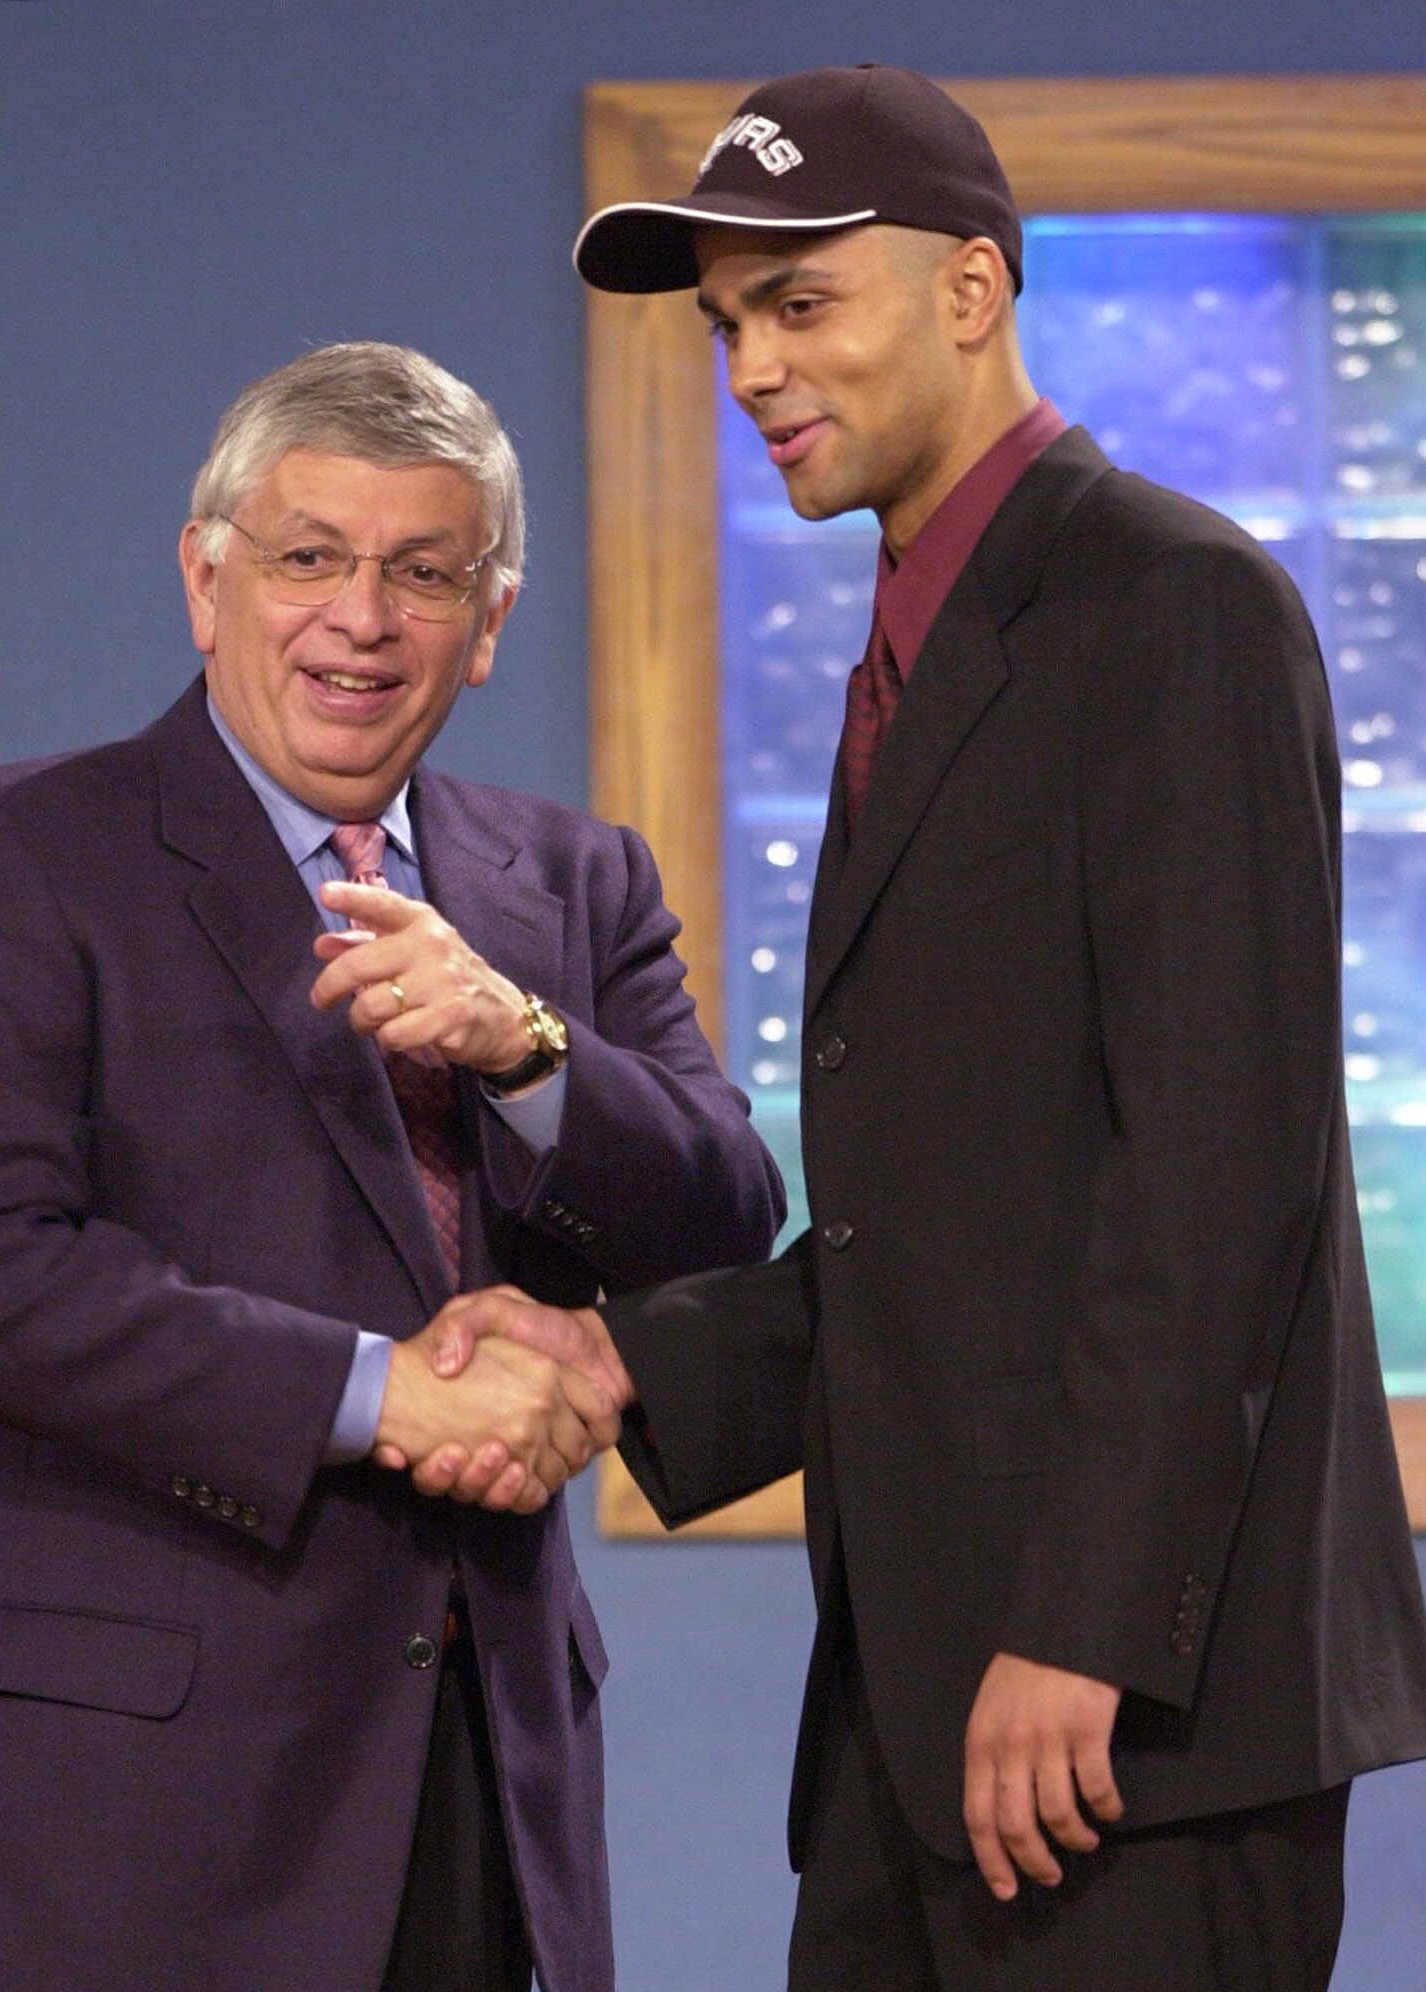 Tony Parker shaking NBA commissioner David Stern's hand during NBA draft night in 2001.